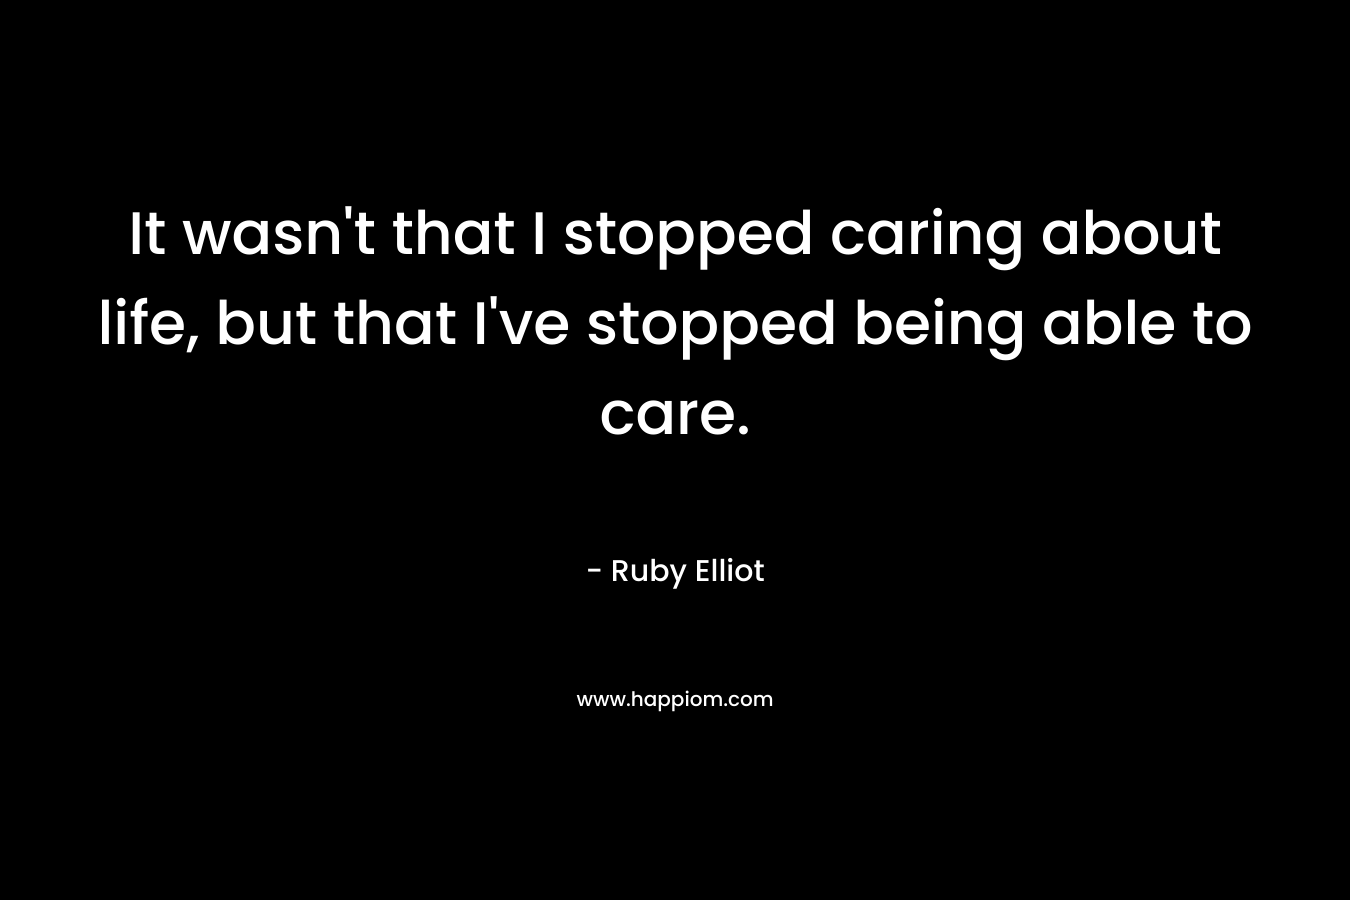 It wasn’t that I stopped caring about life, but that I’ve stopped being able to care. – Ruby Elliot